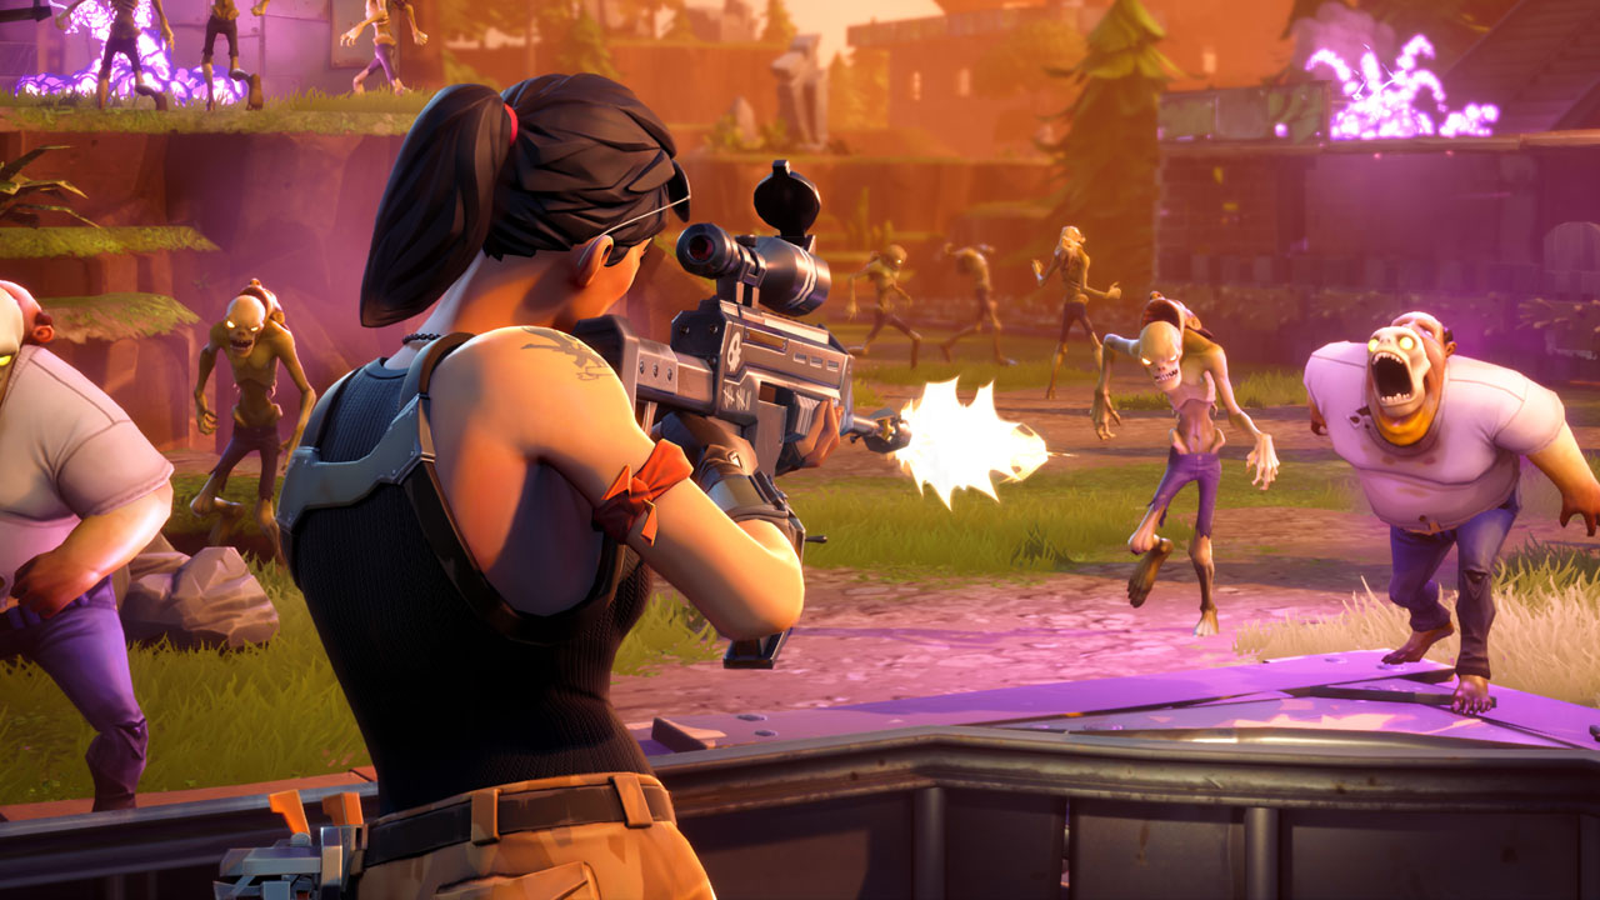 Download Fortnite Battle Royale: Epic Games guide for iOS, PC and console, Gaming, Entertainment